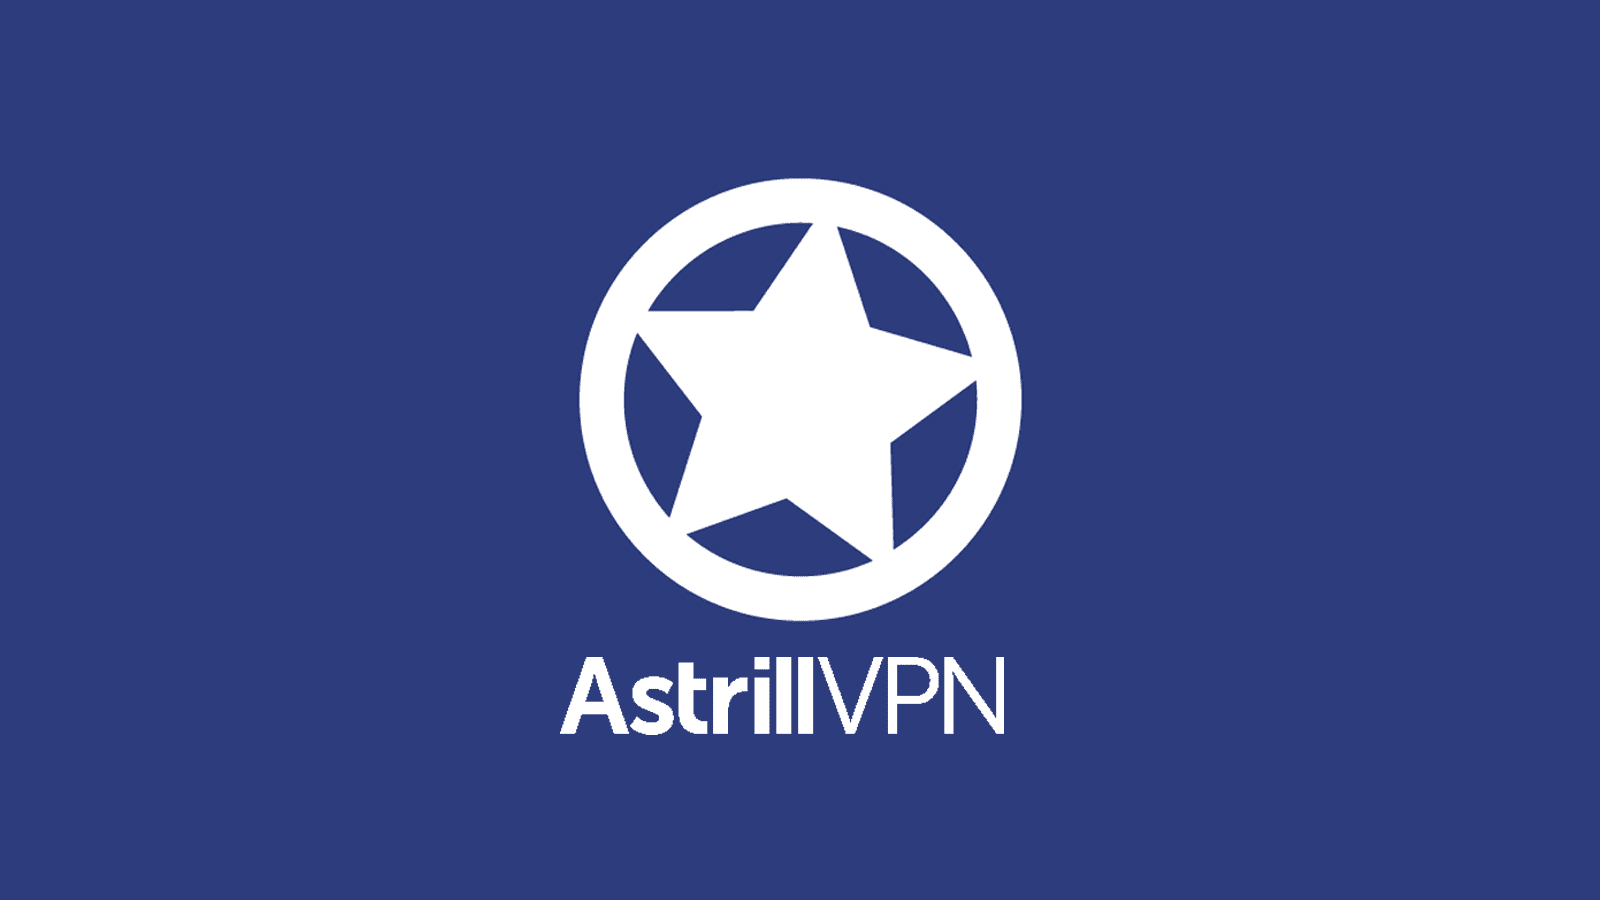 How to Install & Use Astrill VPN for Firestick / Android